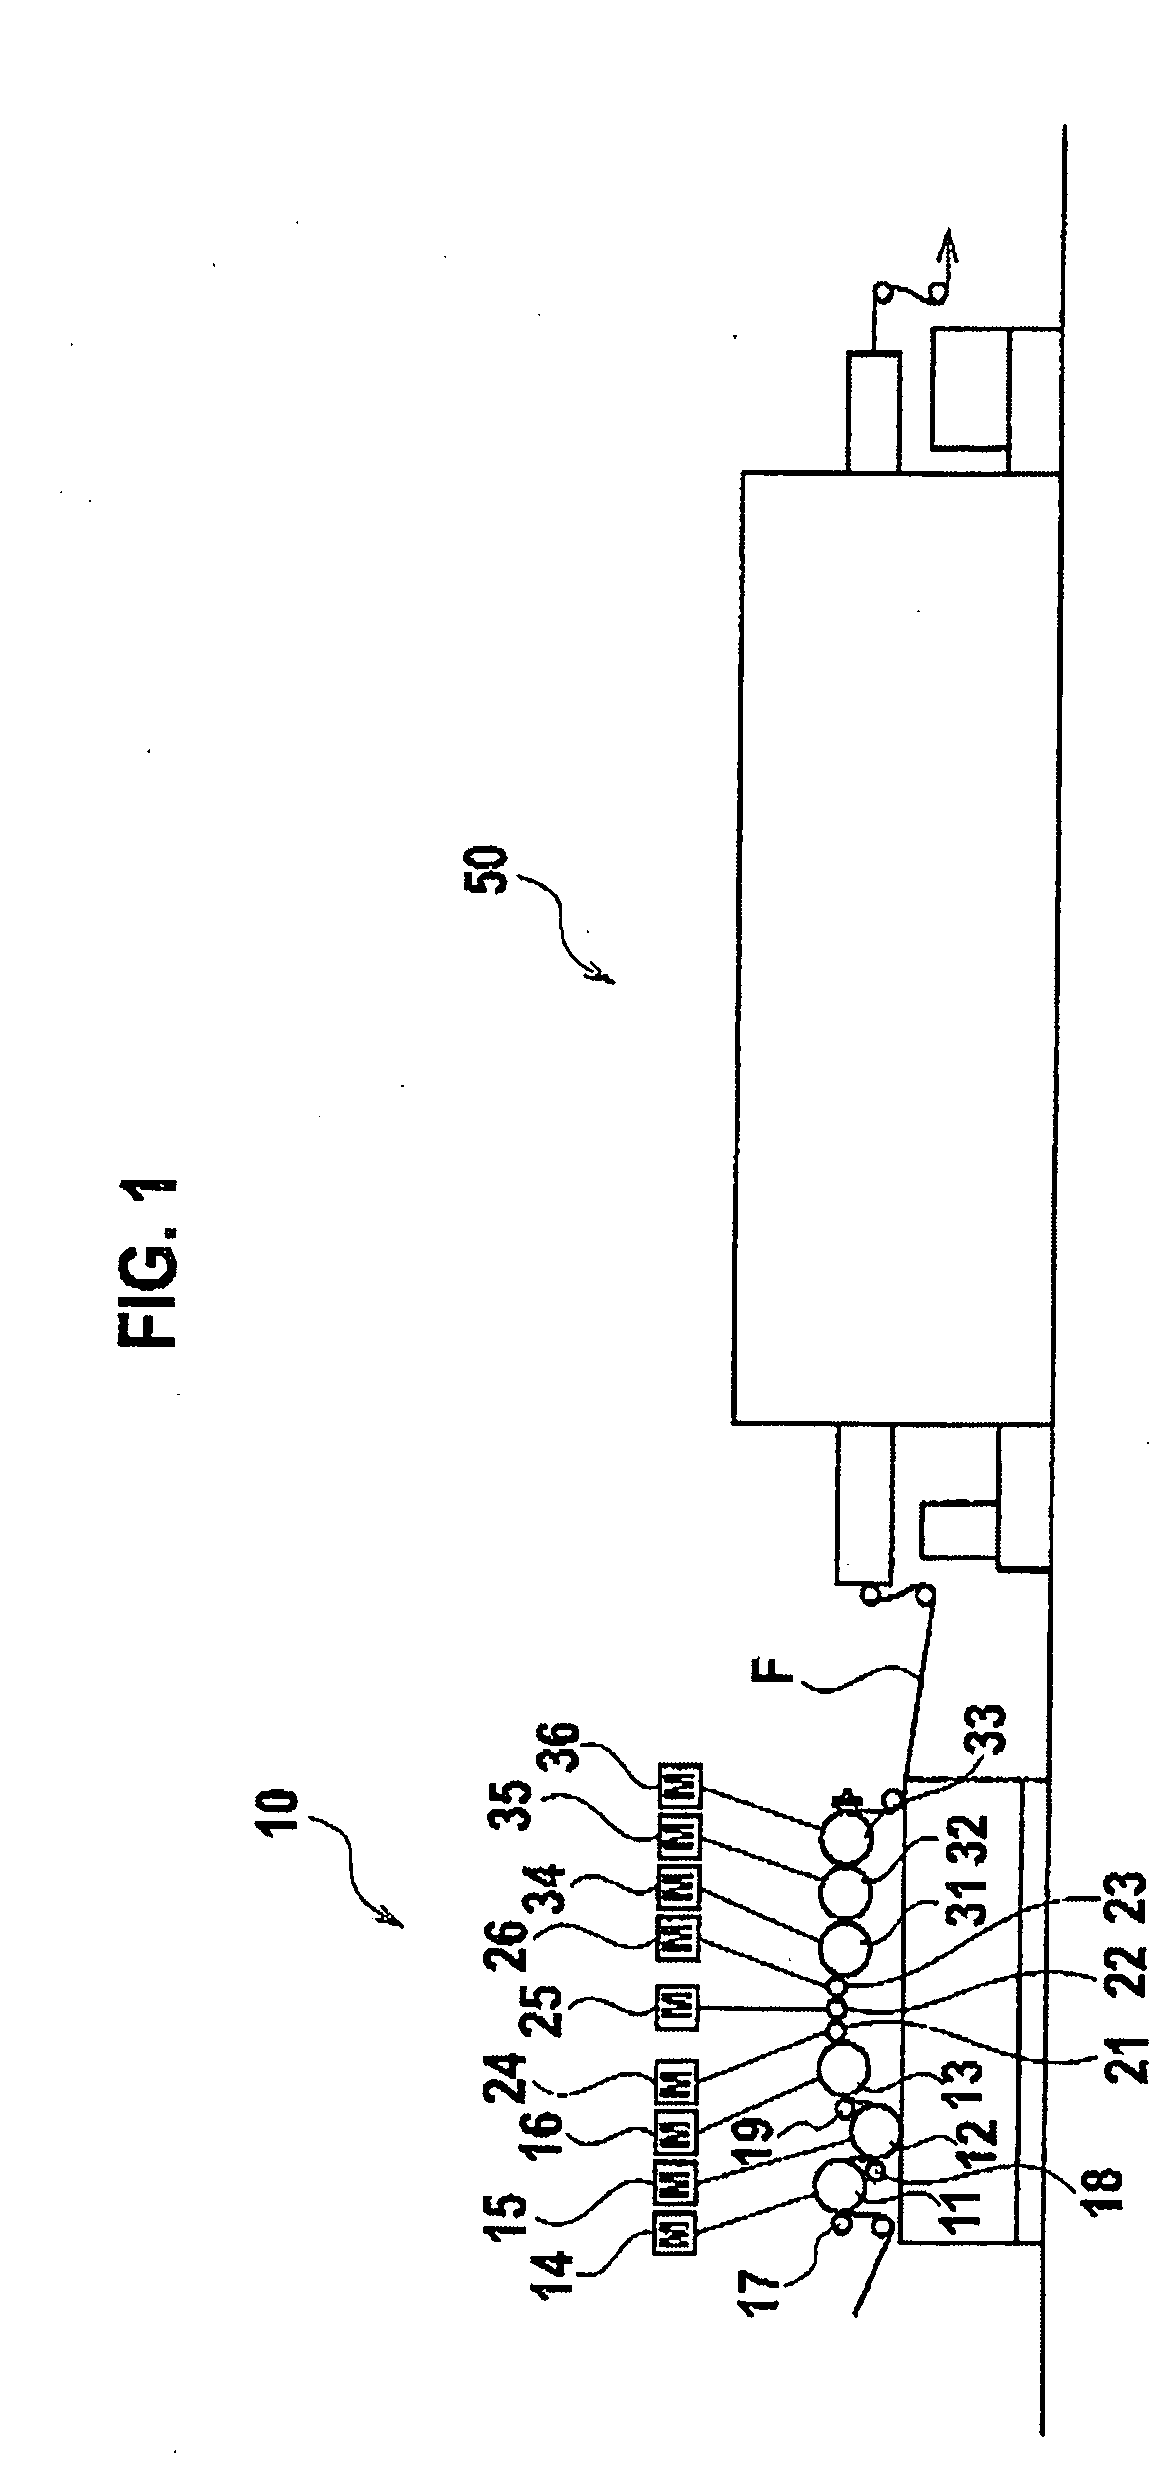 Porous film manufacturing method and successive biaxial stretching apparatus for manufacturing porous film